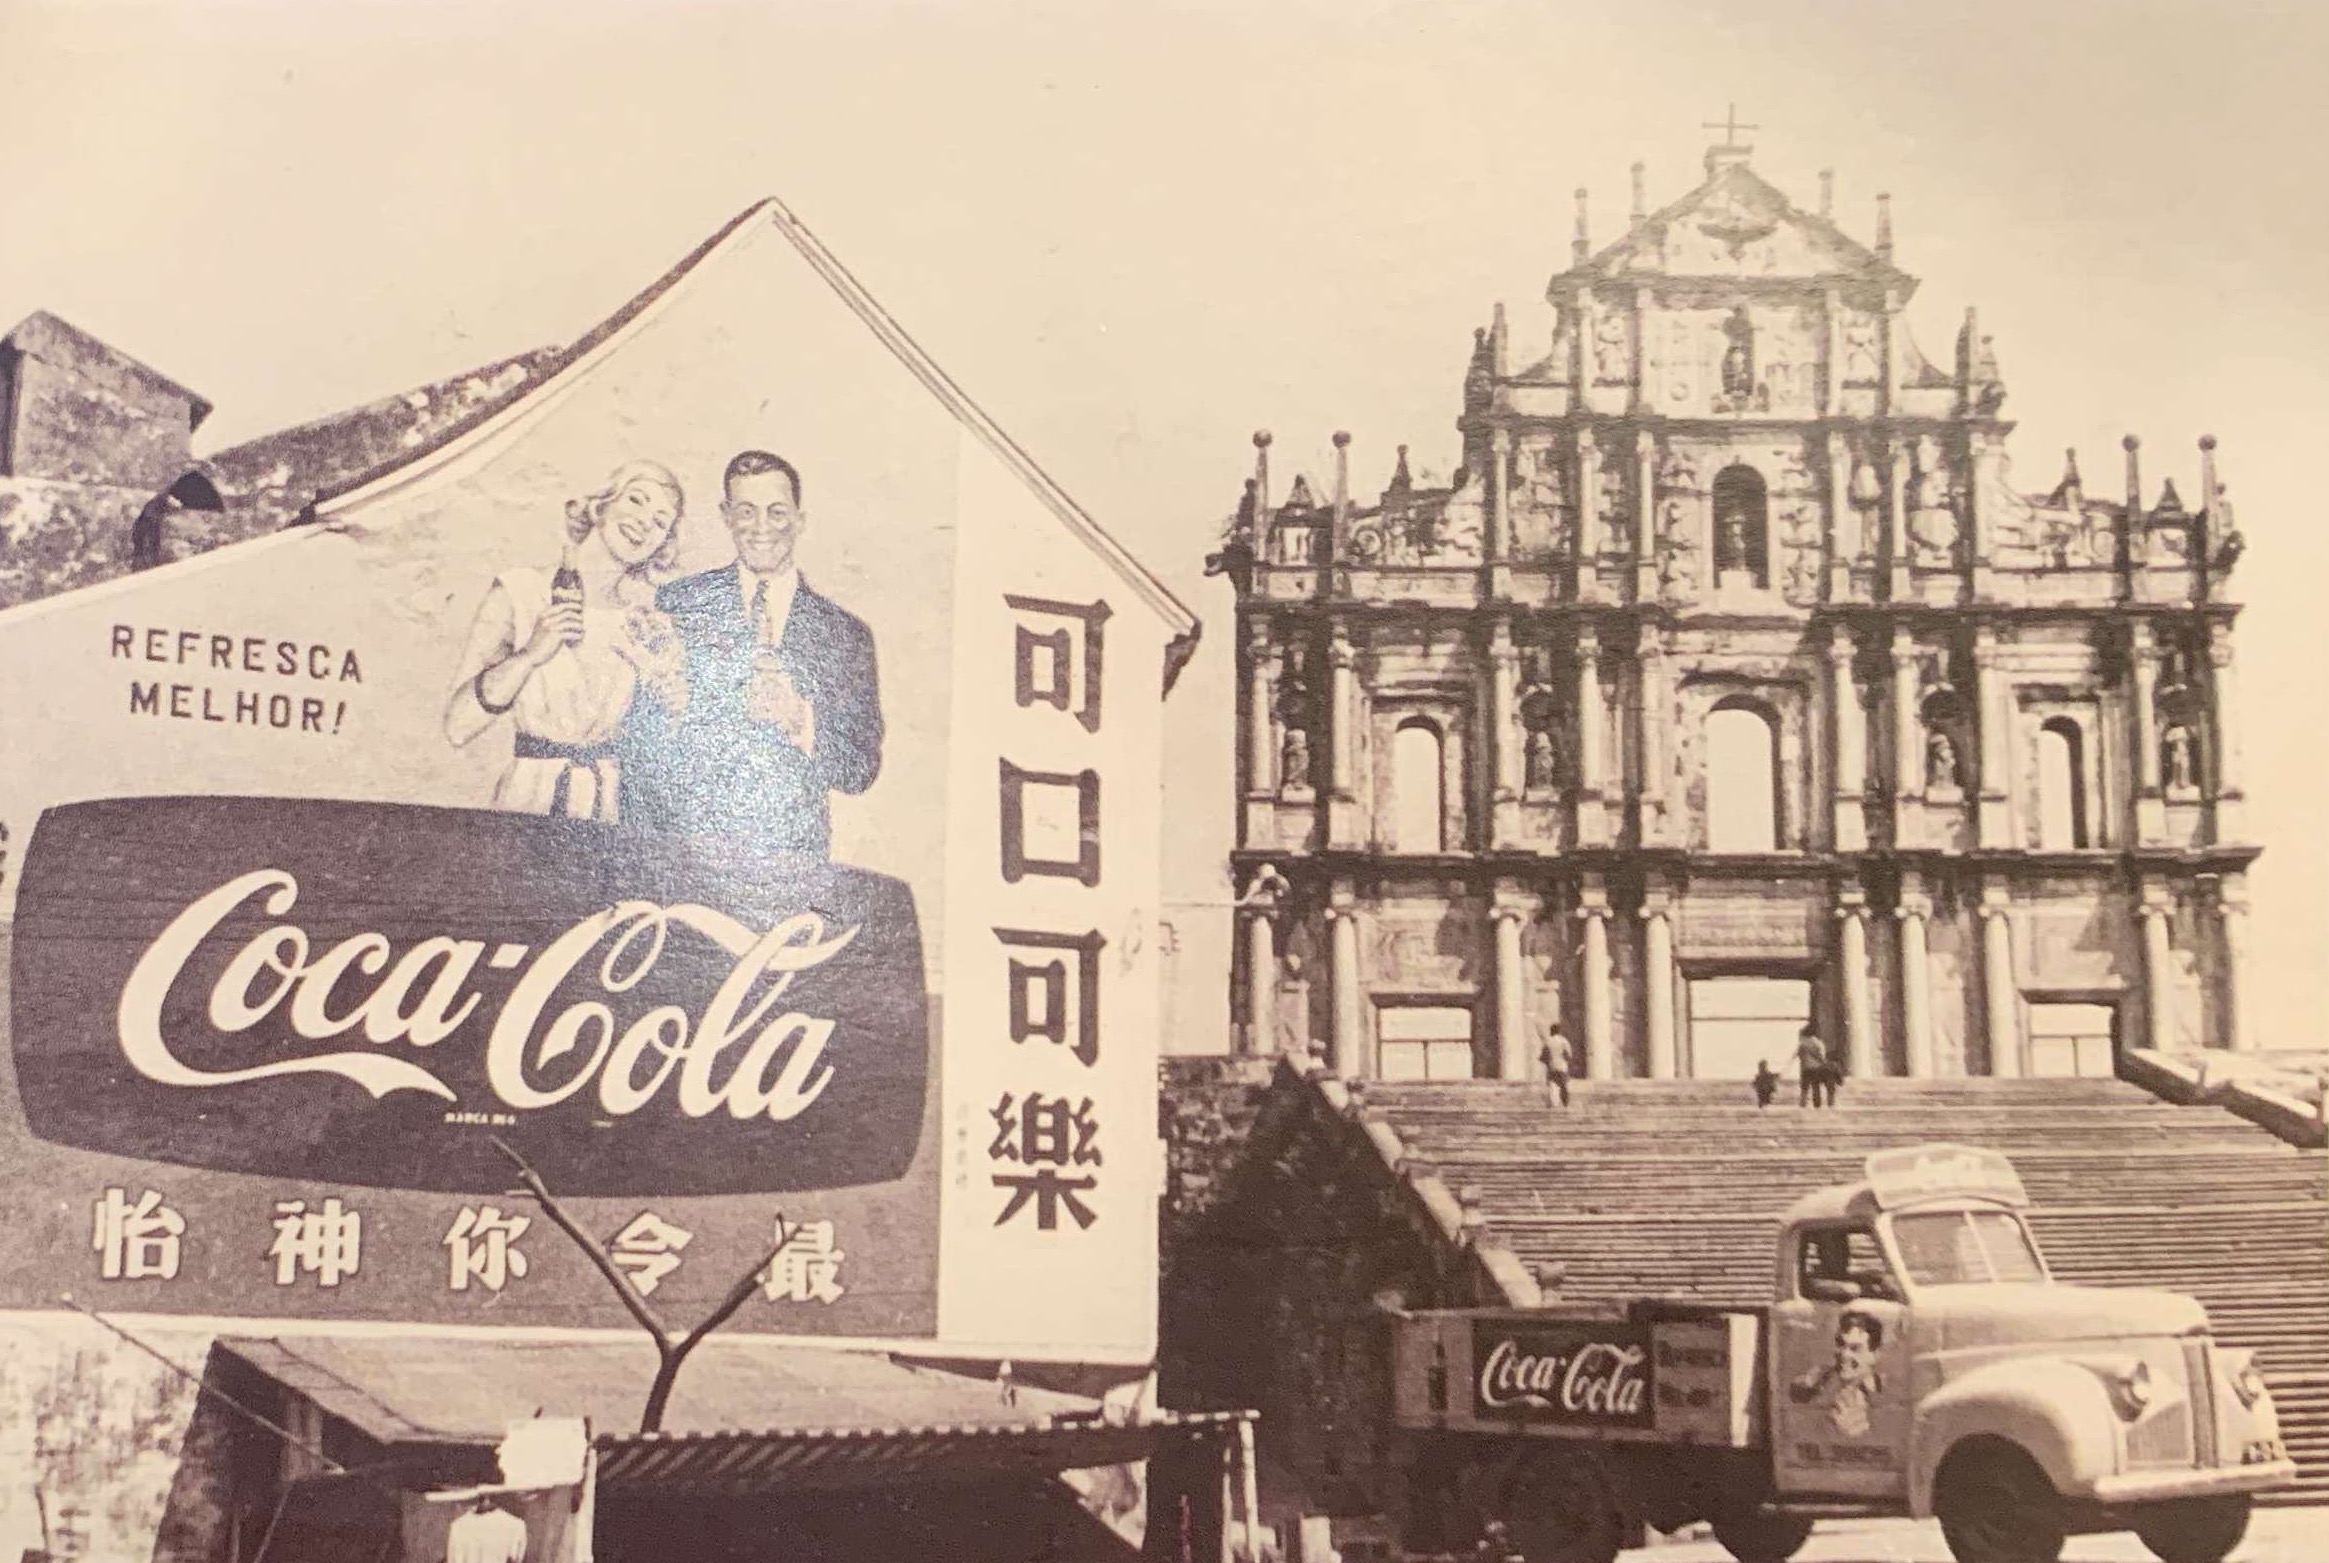 Ruins-of-St-Paul-in-the-50s-with-big-Coca-Cola-Ad-on-the-side-and-an-old-truck